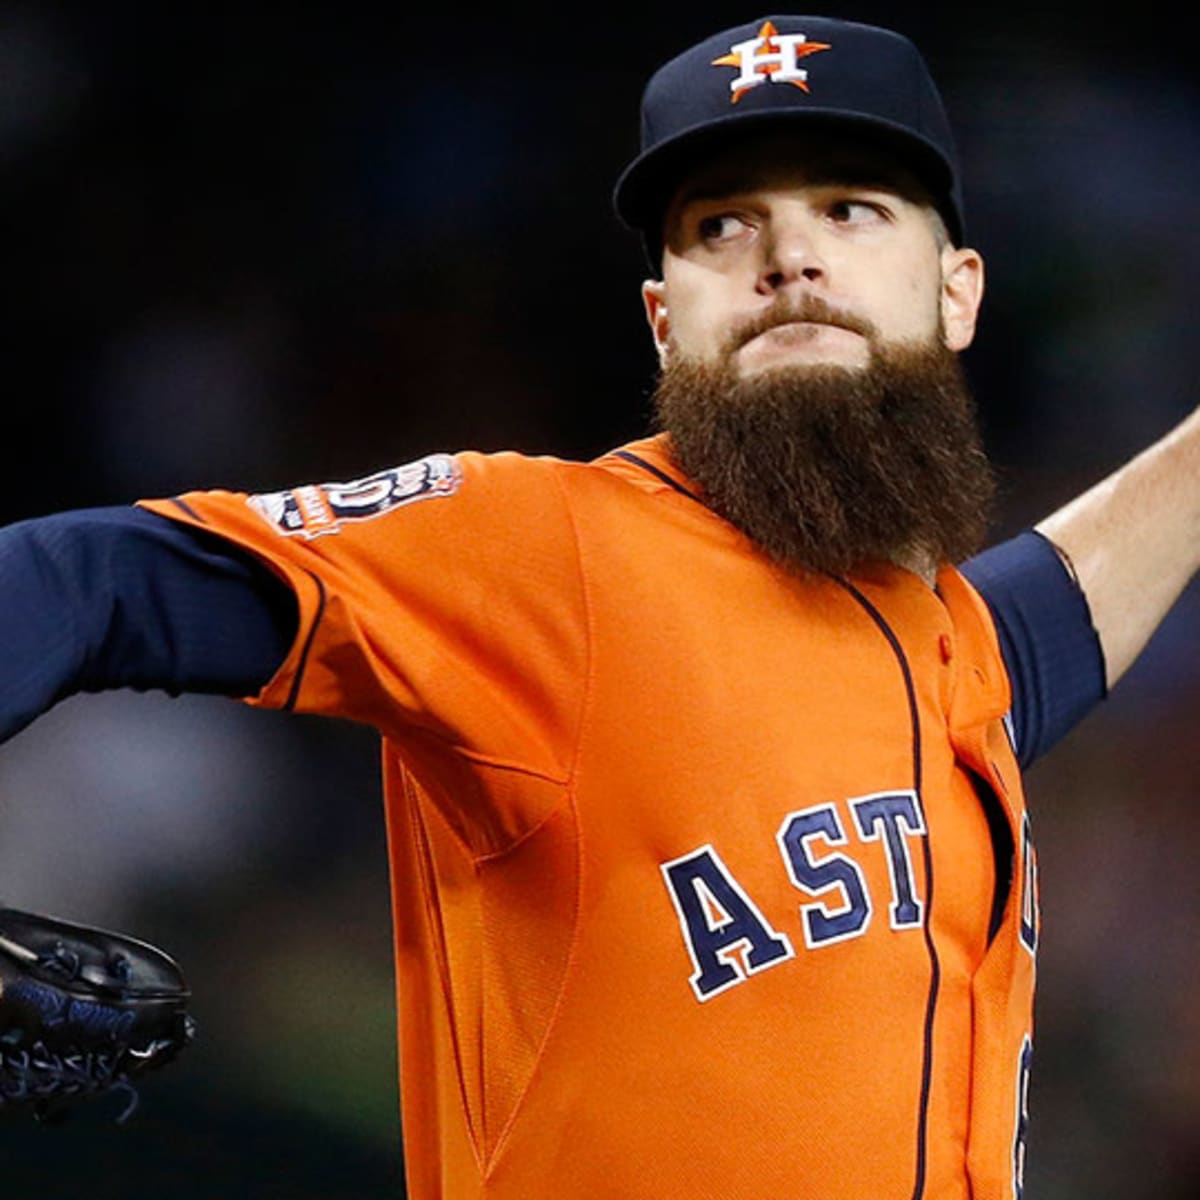 Keuchel's strong start has bad finish for Astros - The San Diego